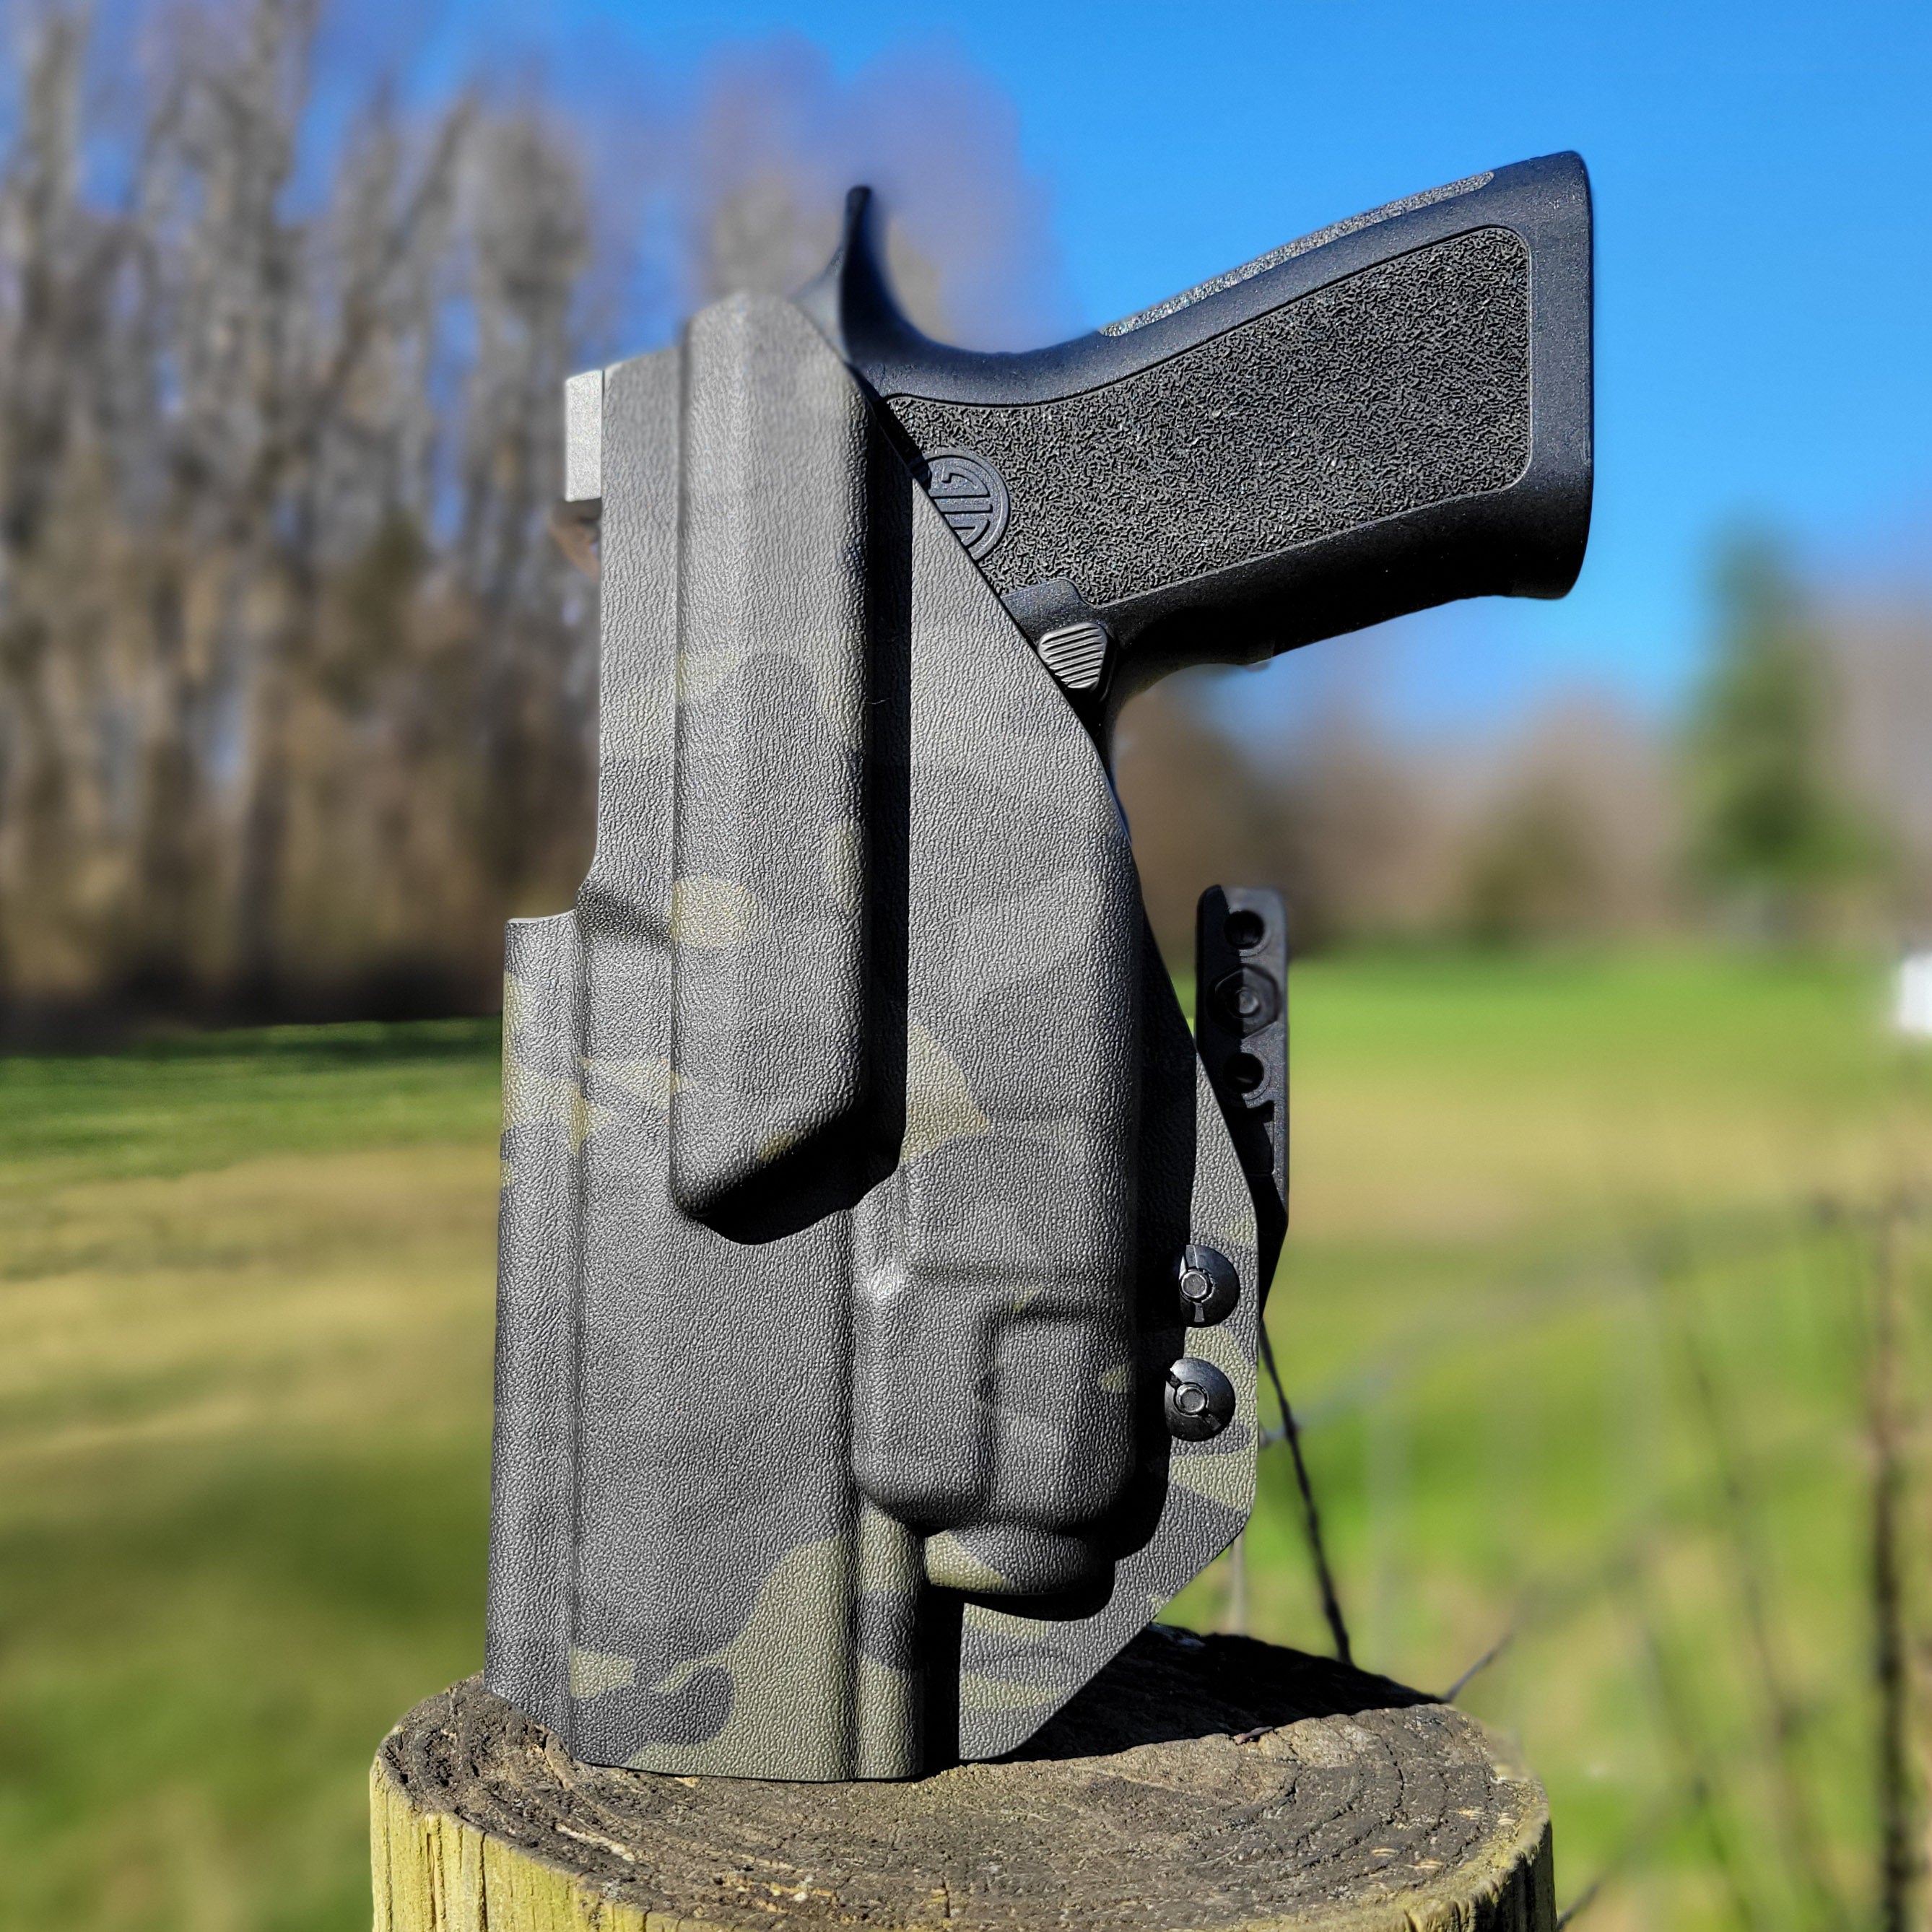 Inside Waistband Holster designed to fit the Sig Sauer P320 Full Size, X5 and M17 pistols with the Streamlight TLR-7 or TLR-7A light and GoGuns USA Gas Pedal mounted to the pistol. 